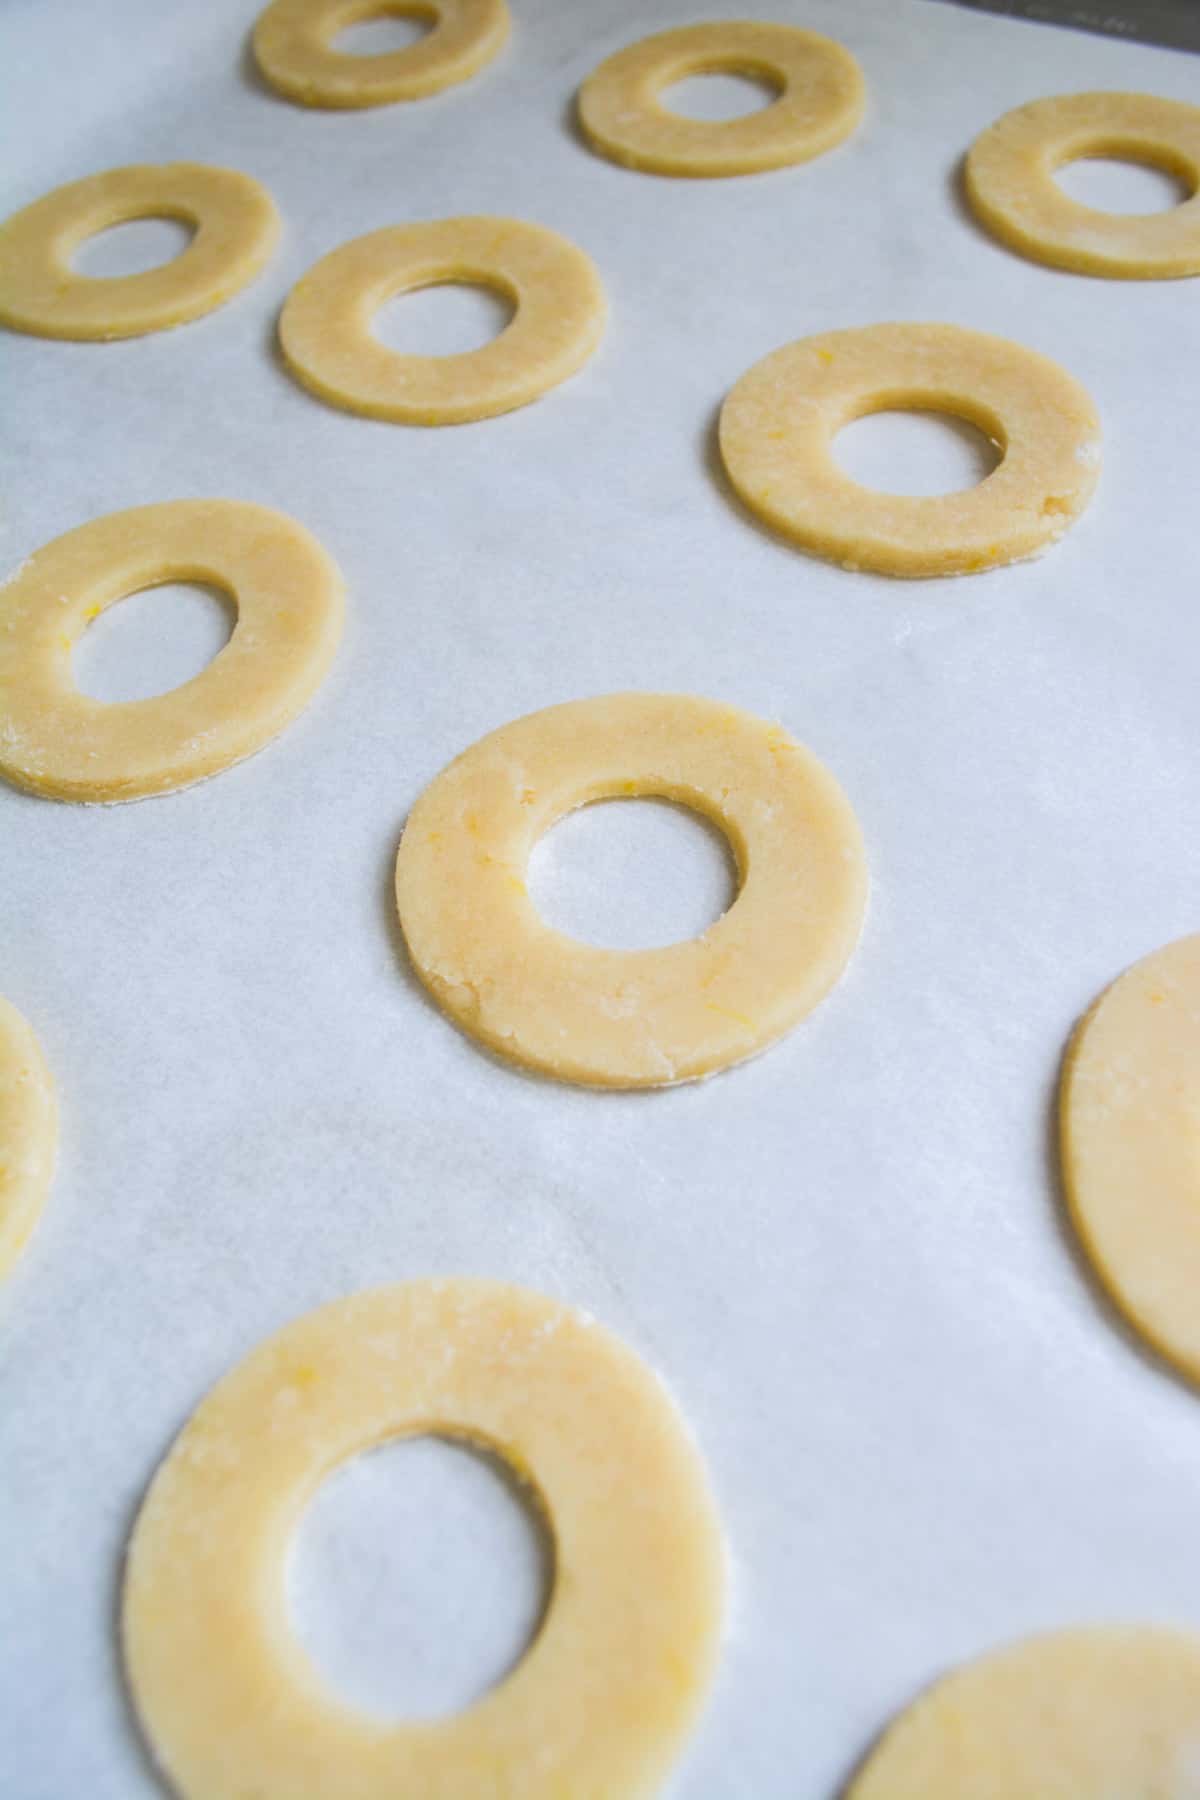 The tops of the cookies on a parchment lined baking sheet.